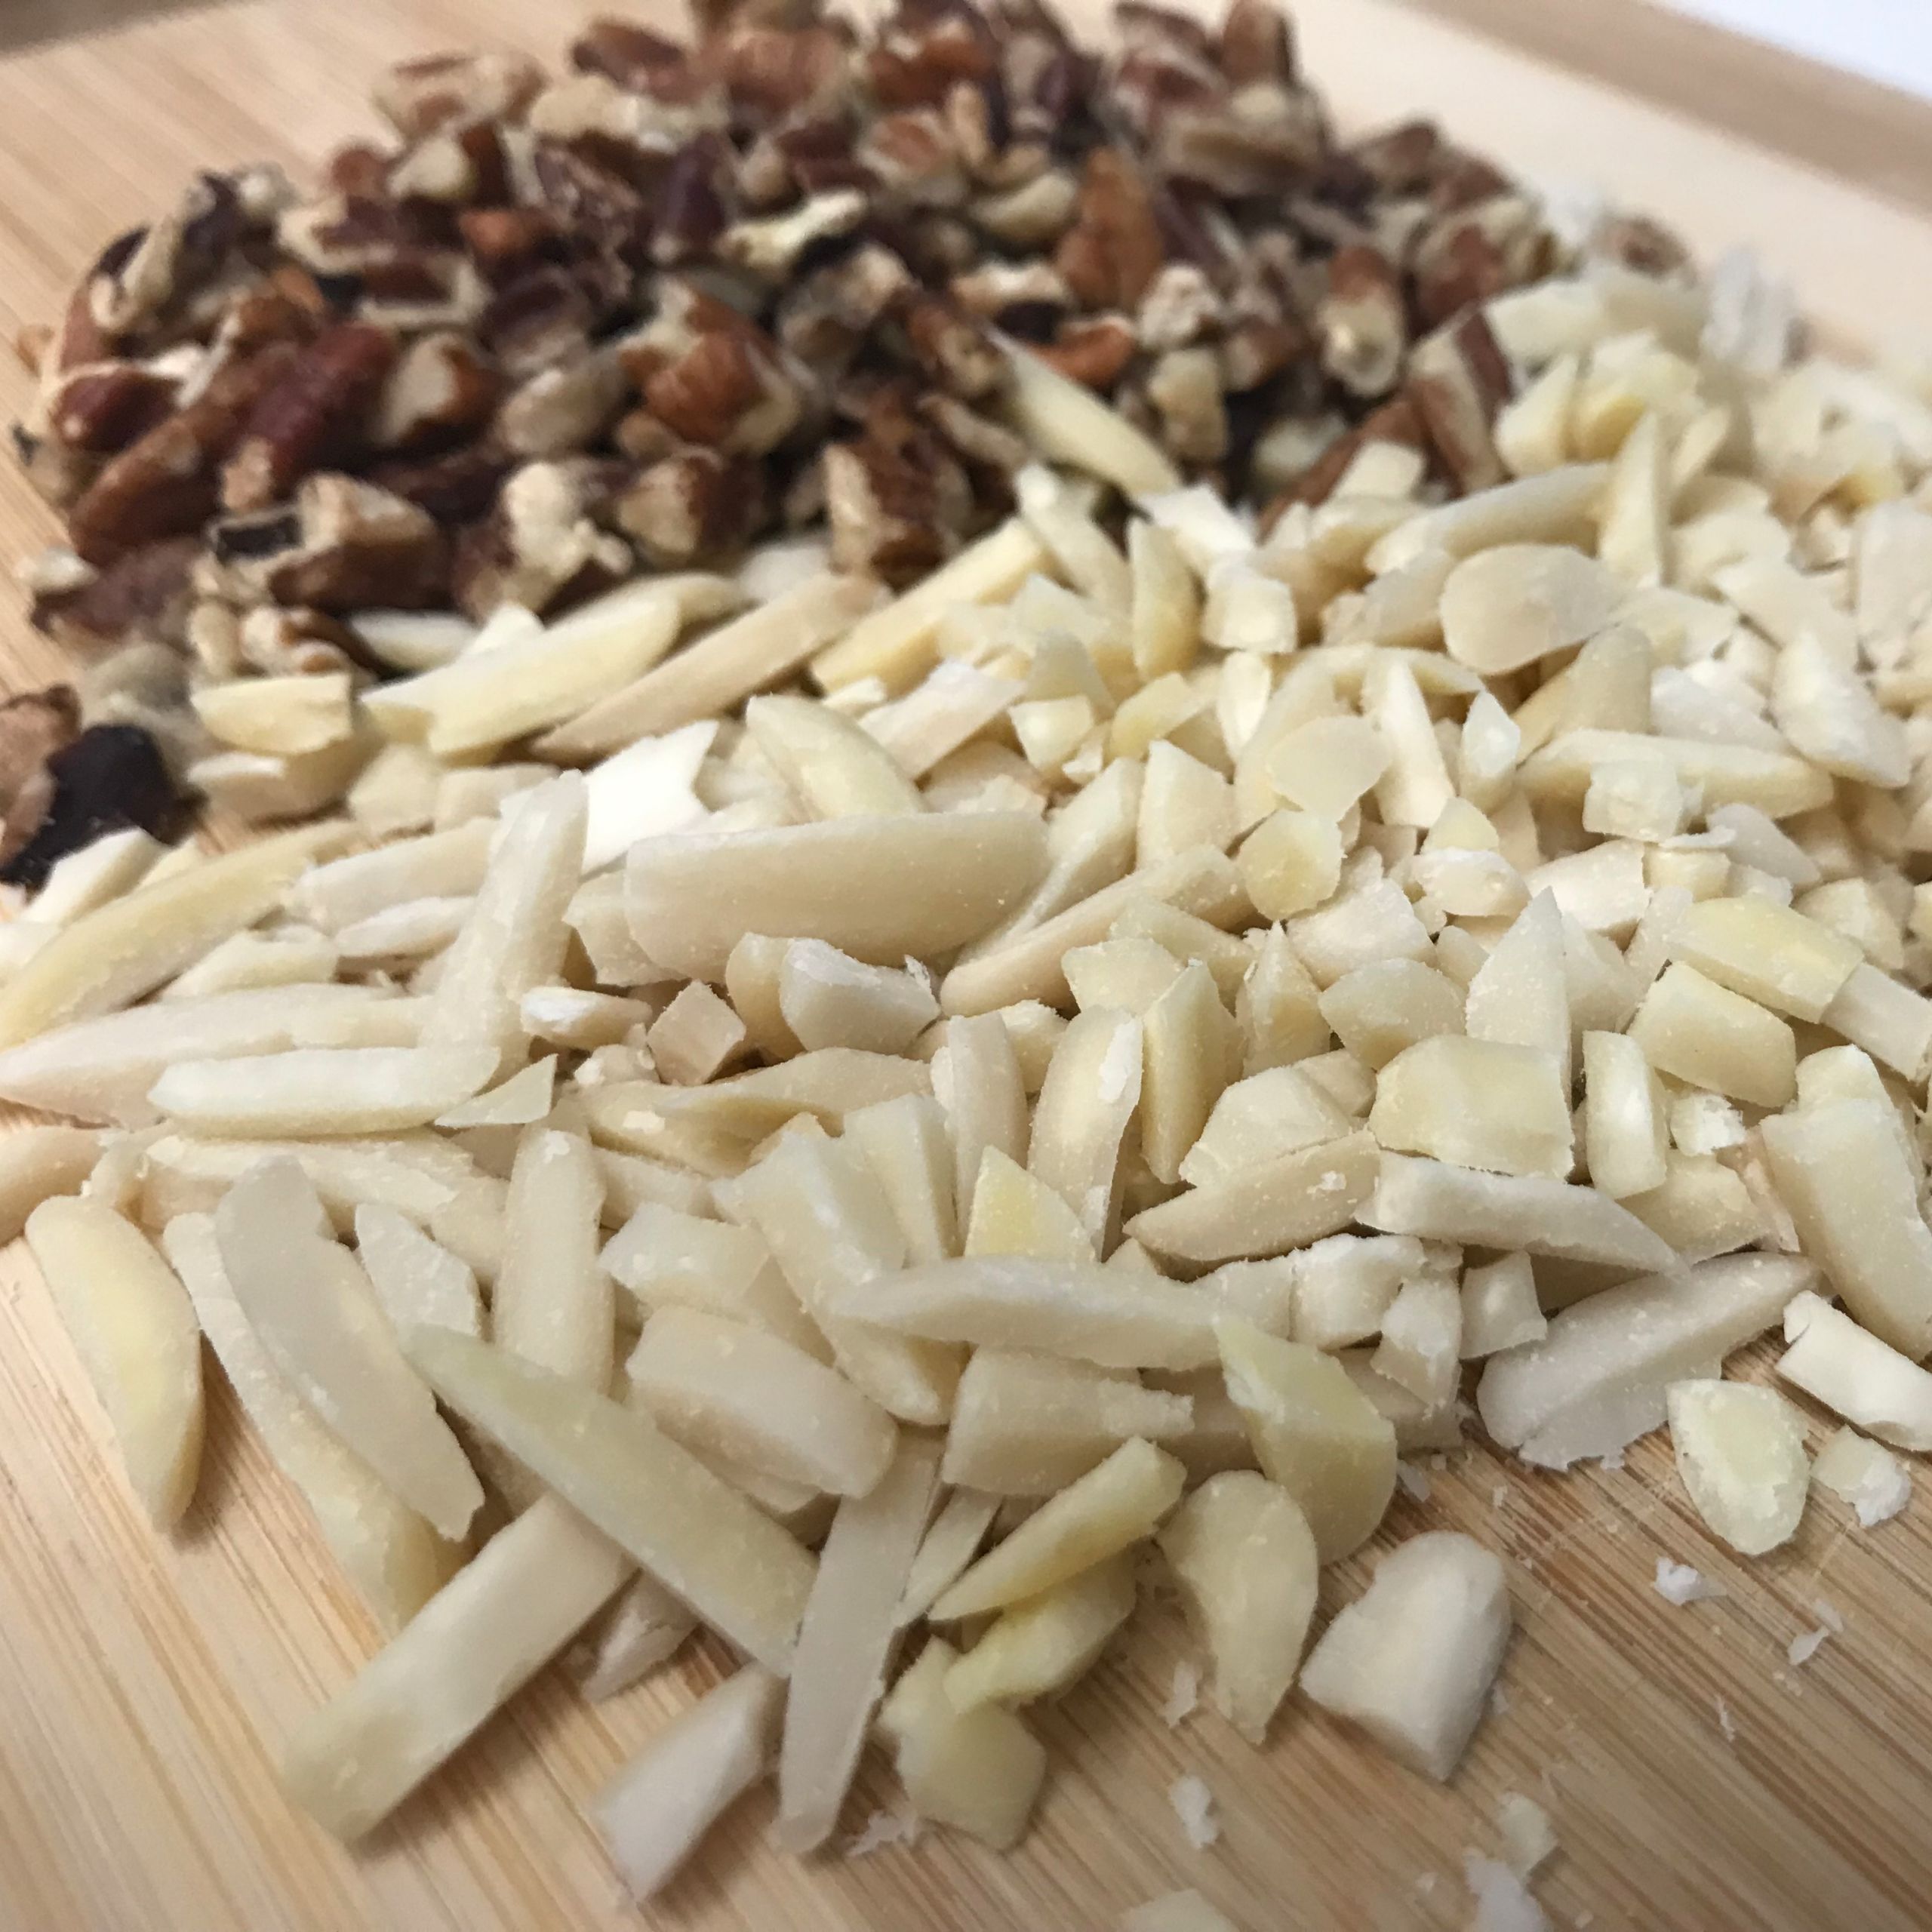 Chopped nuts